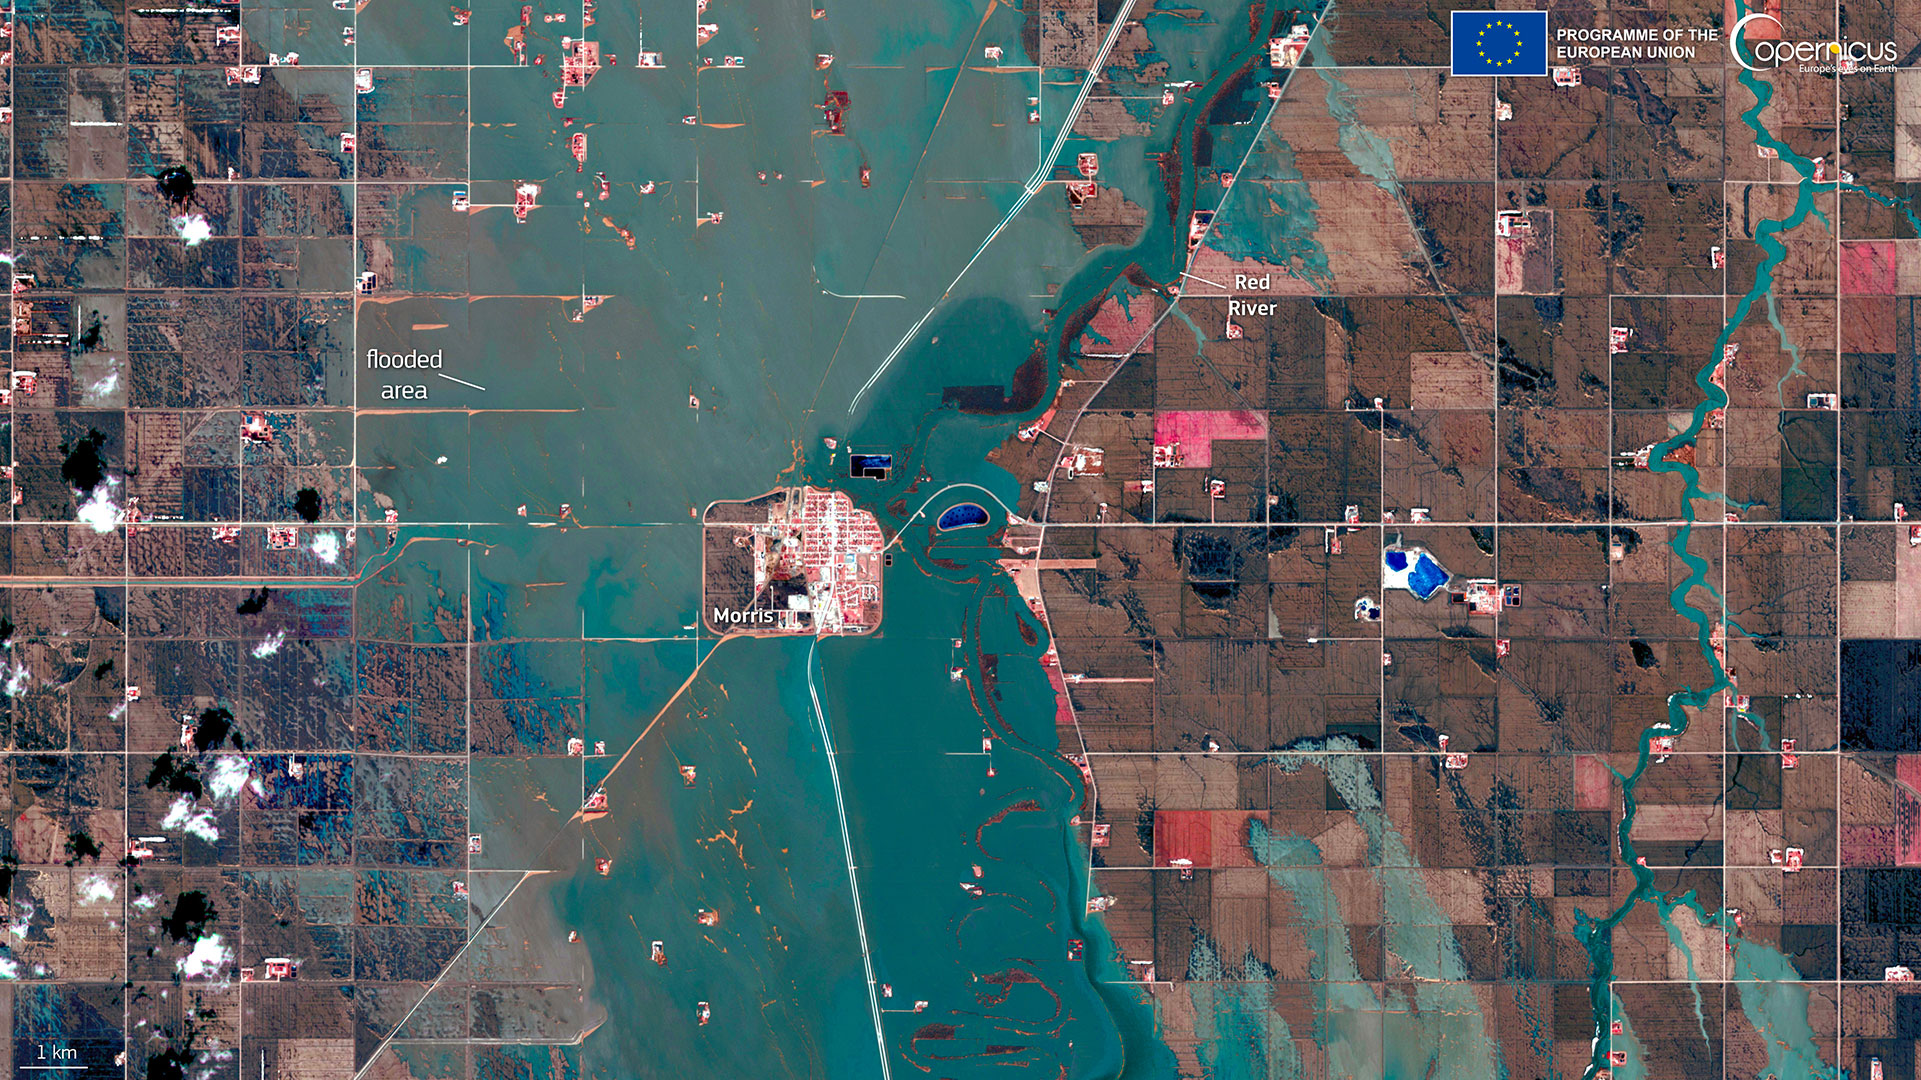 The town of Morris in Manitoba, Canada – which has been experiencing heavy flooding since April 2022 – has been cut off by the flood waters, as shown in this Sentinel-2 satellite image acquired on May 5, 2022.